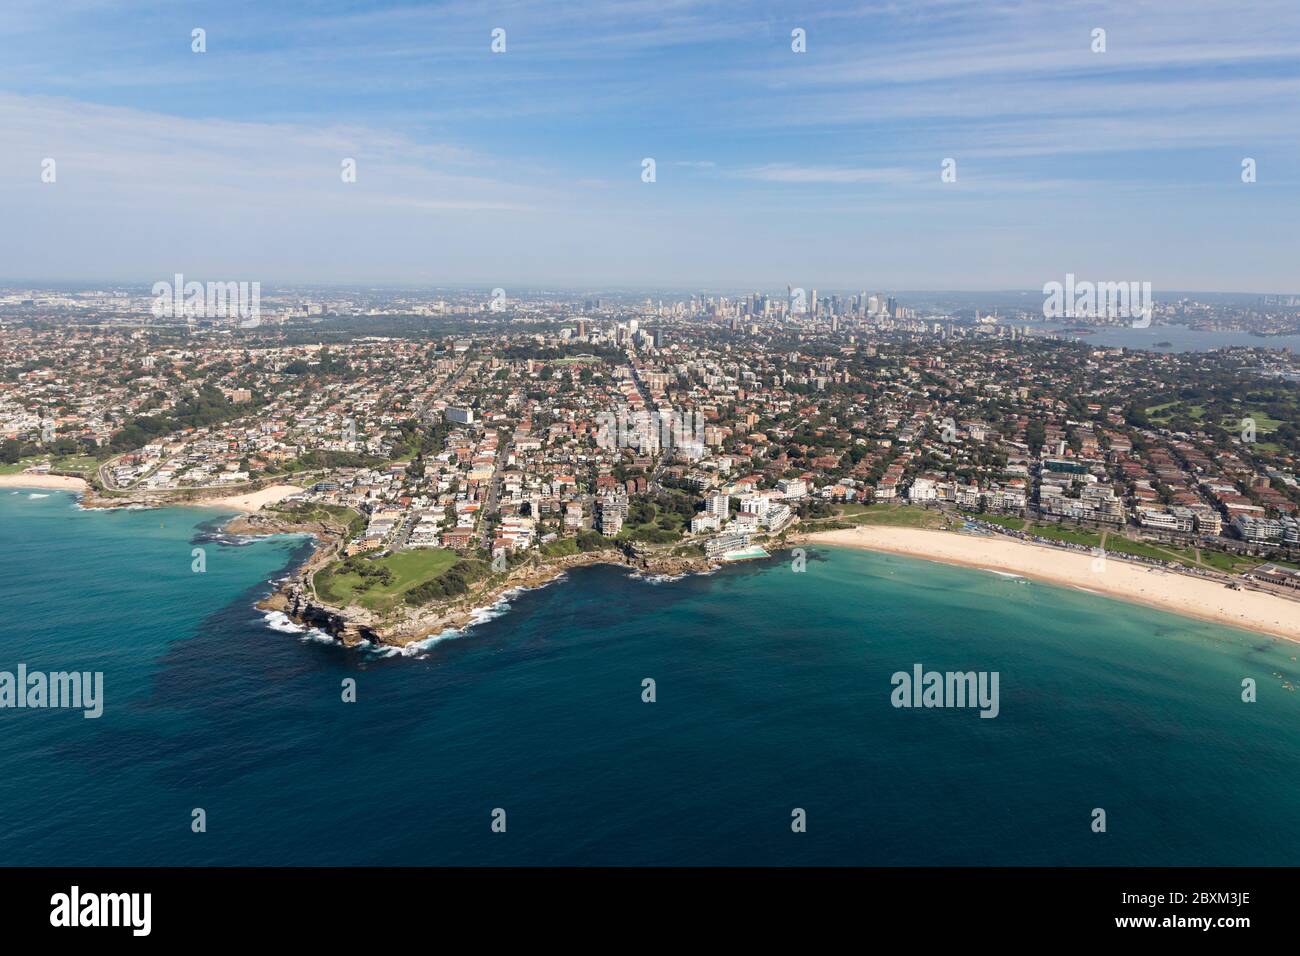 Aerial view of the famous Bondi Beach - one of the most famous beaches located a short drive from the CBD of Sydney Stock Photo